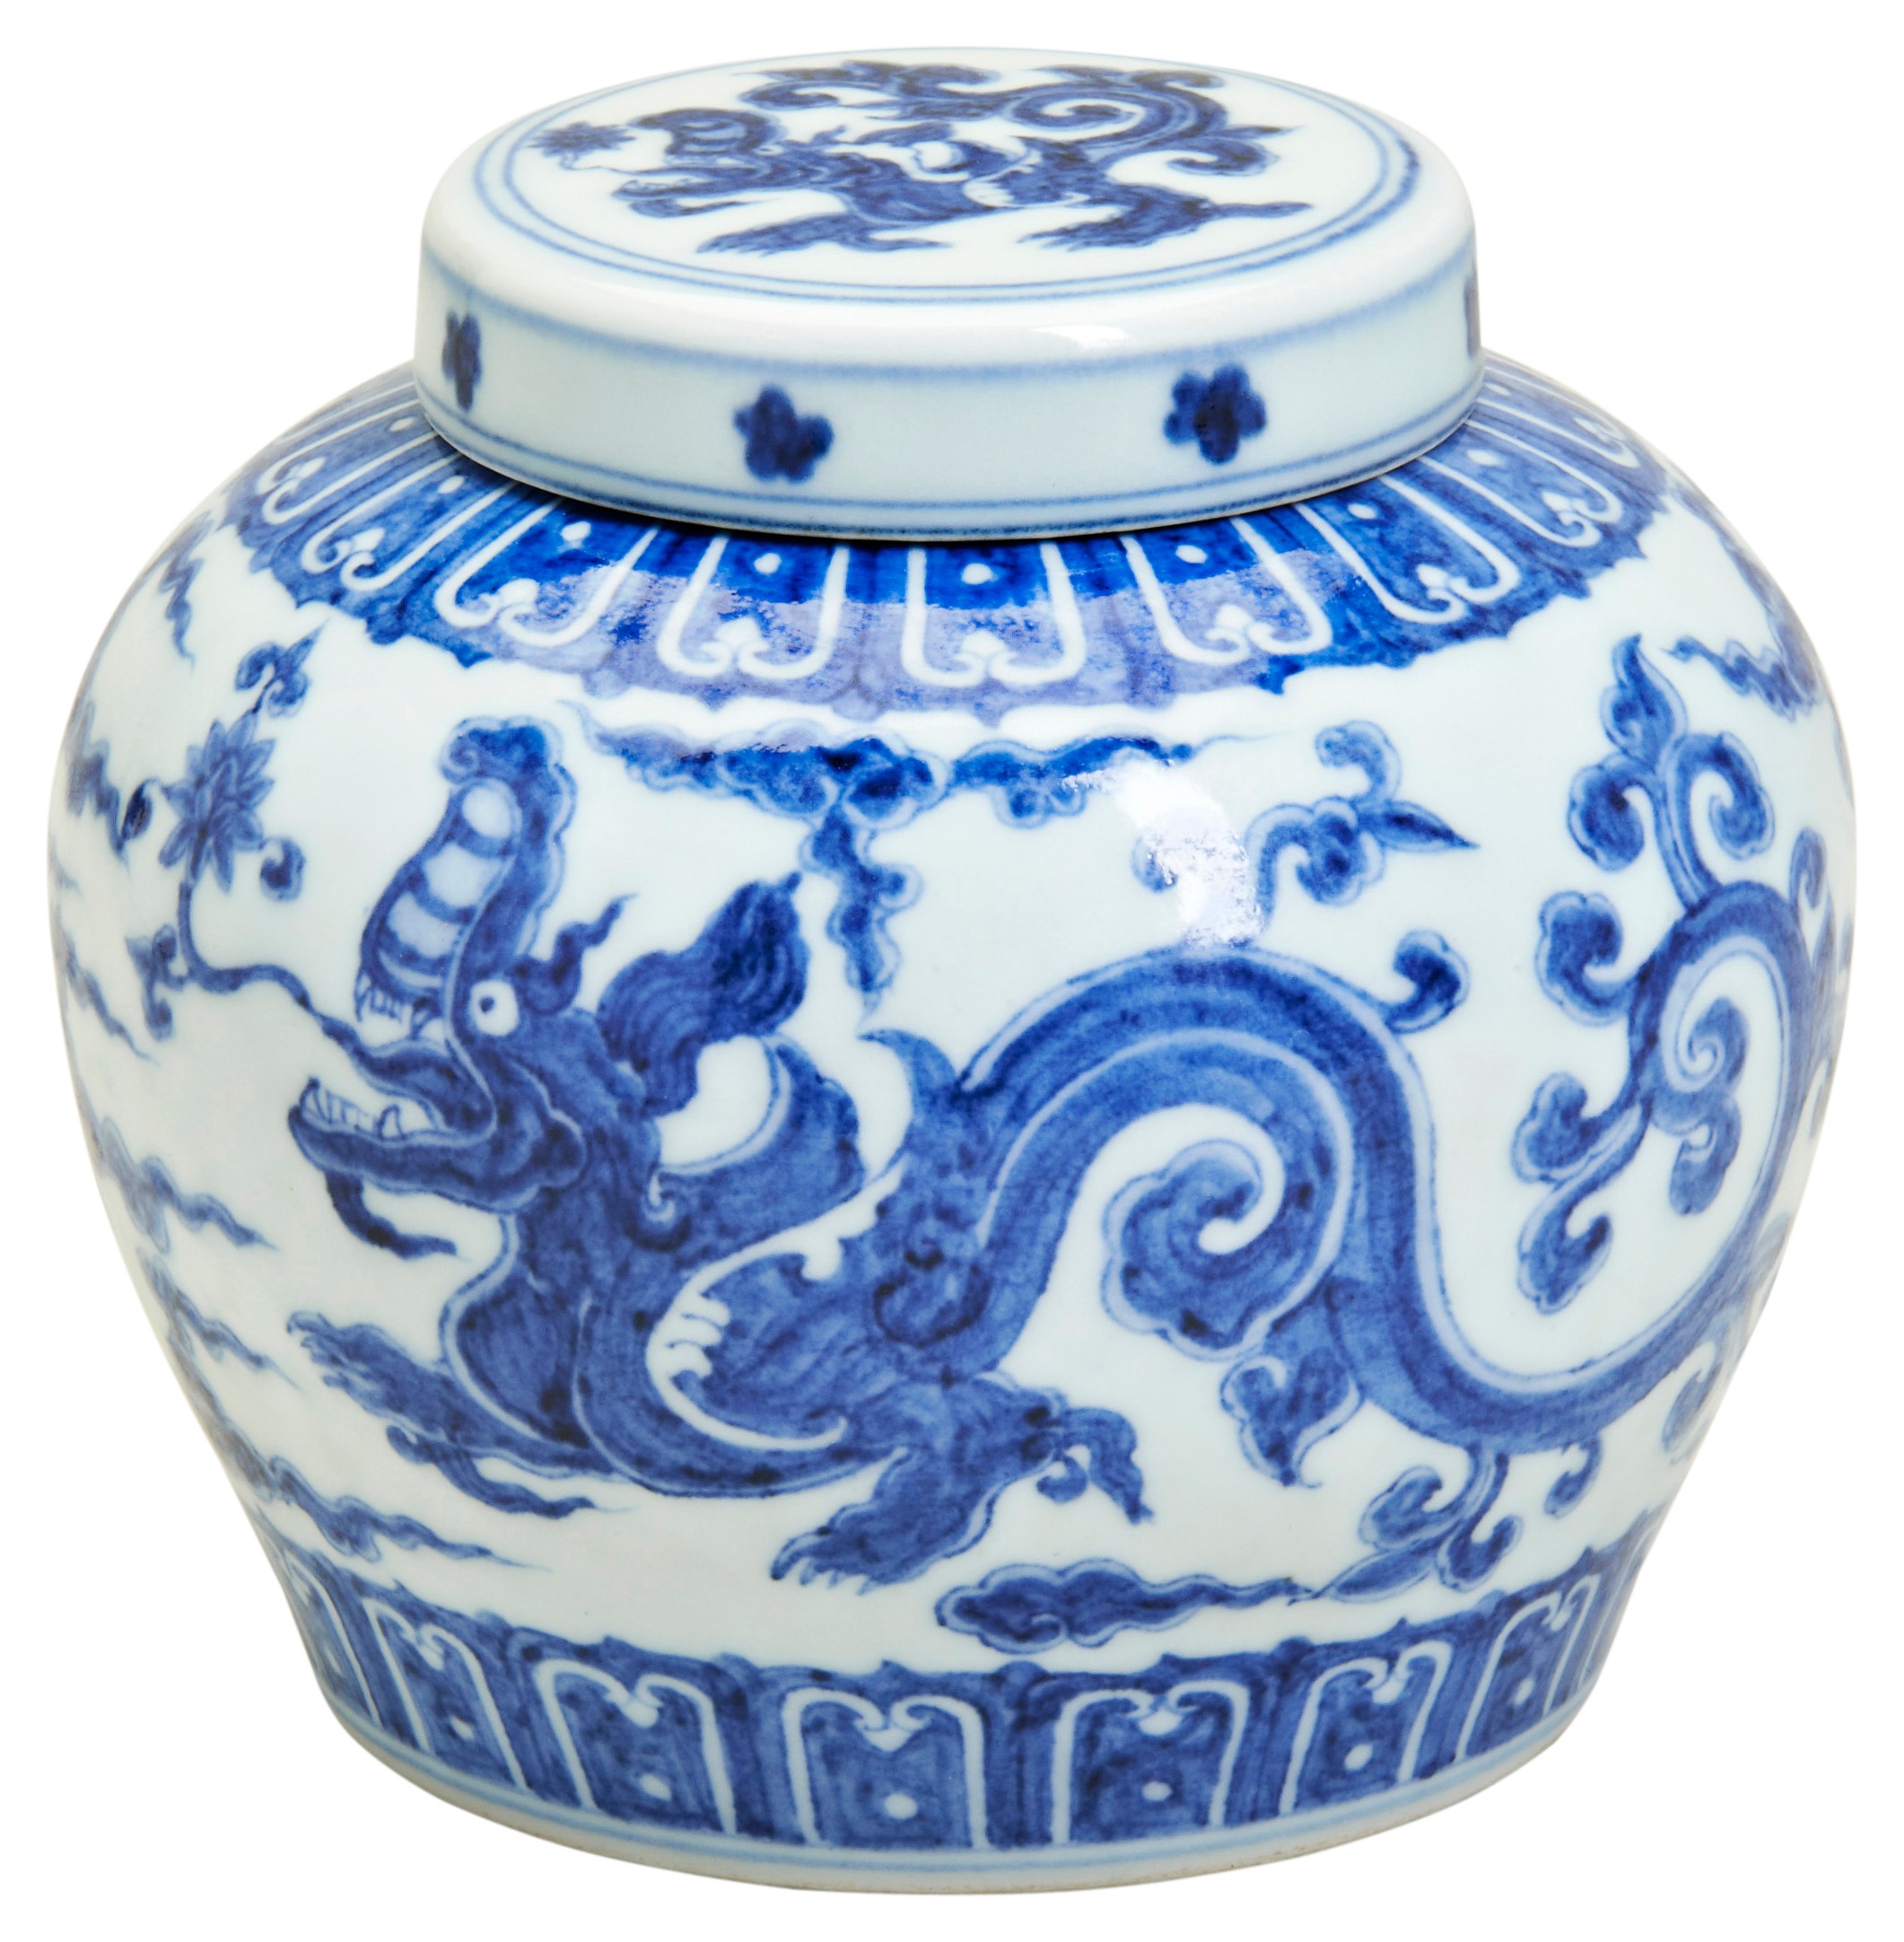 A FINE AND RARE SMALL MING-STYLE BLUE AND WHITE 'DRAGON' JAR AND COVER QING DYNASTY (1644-1911)